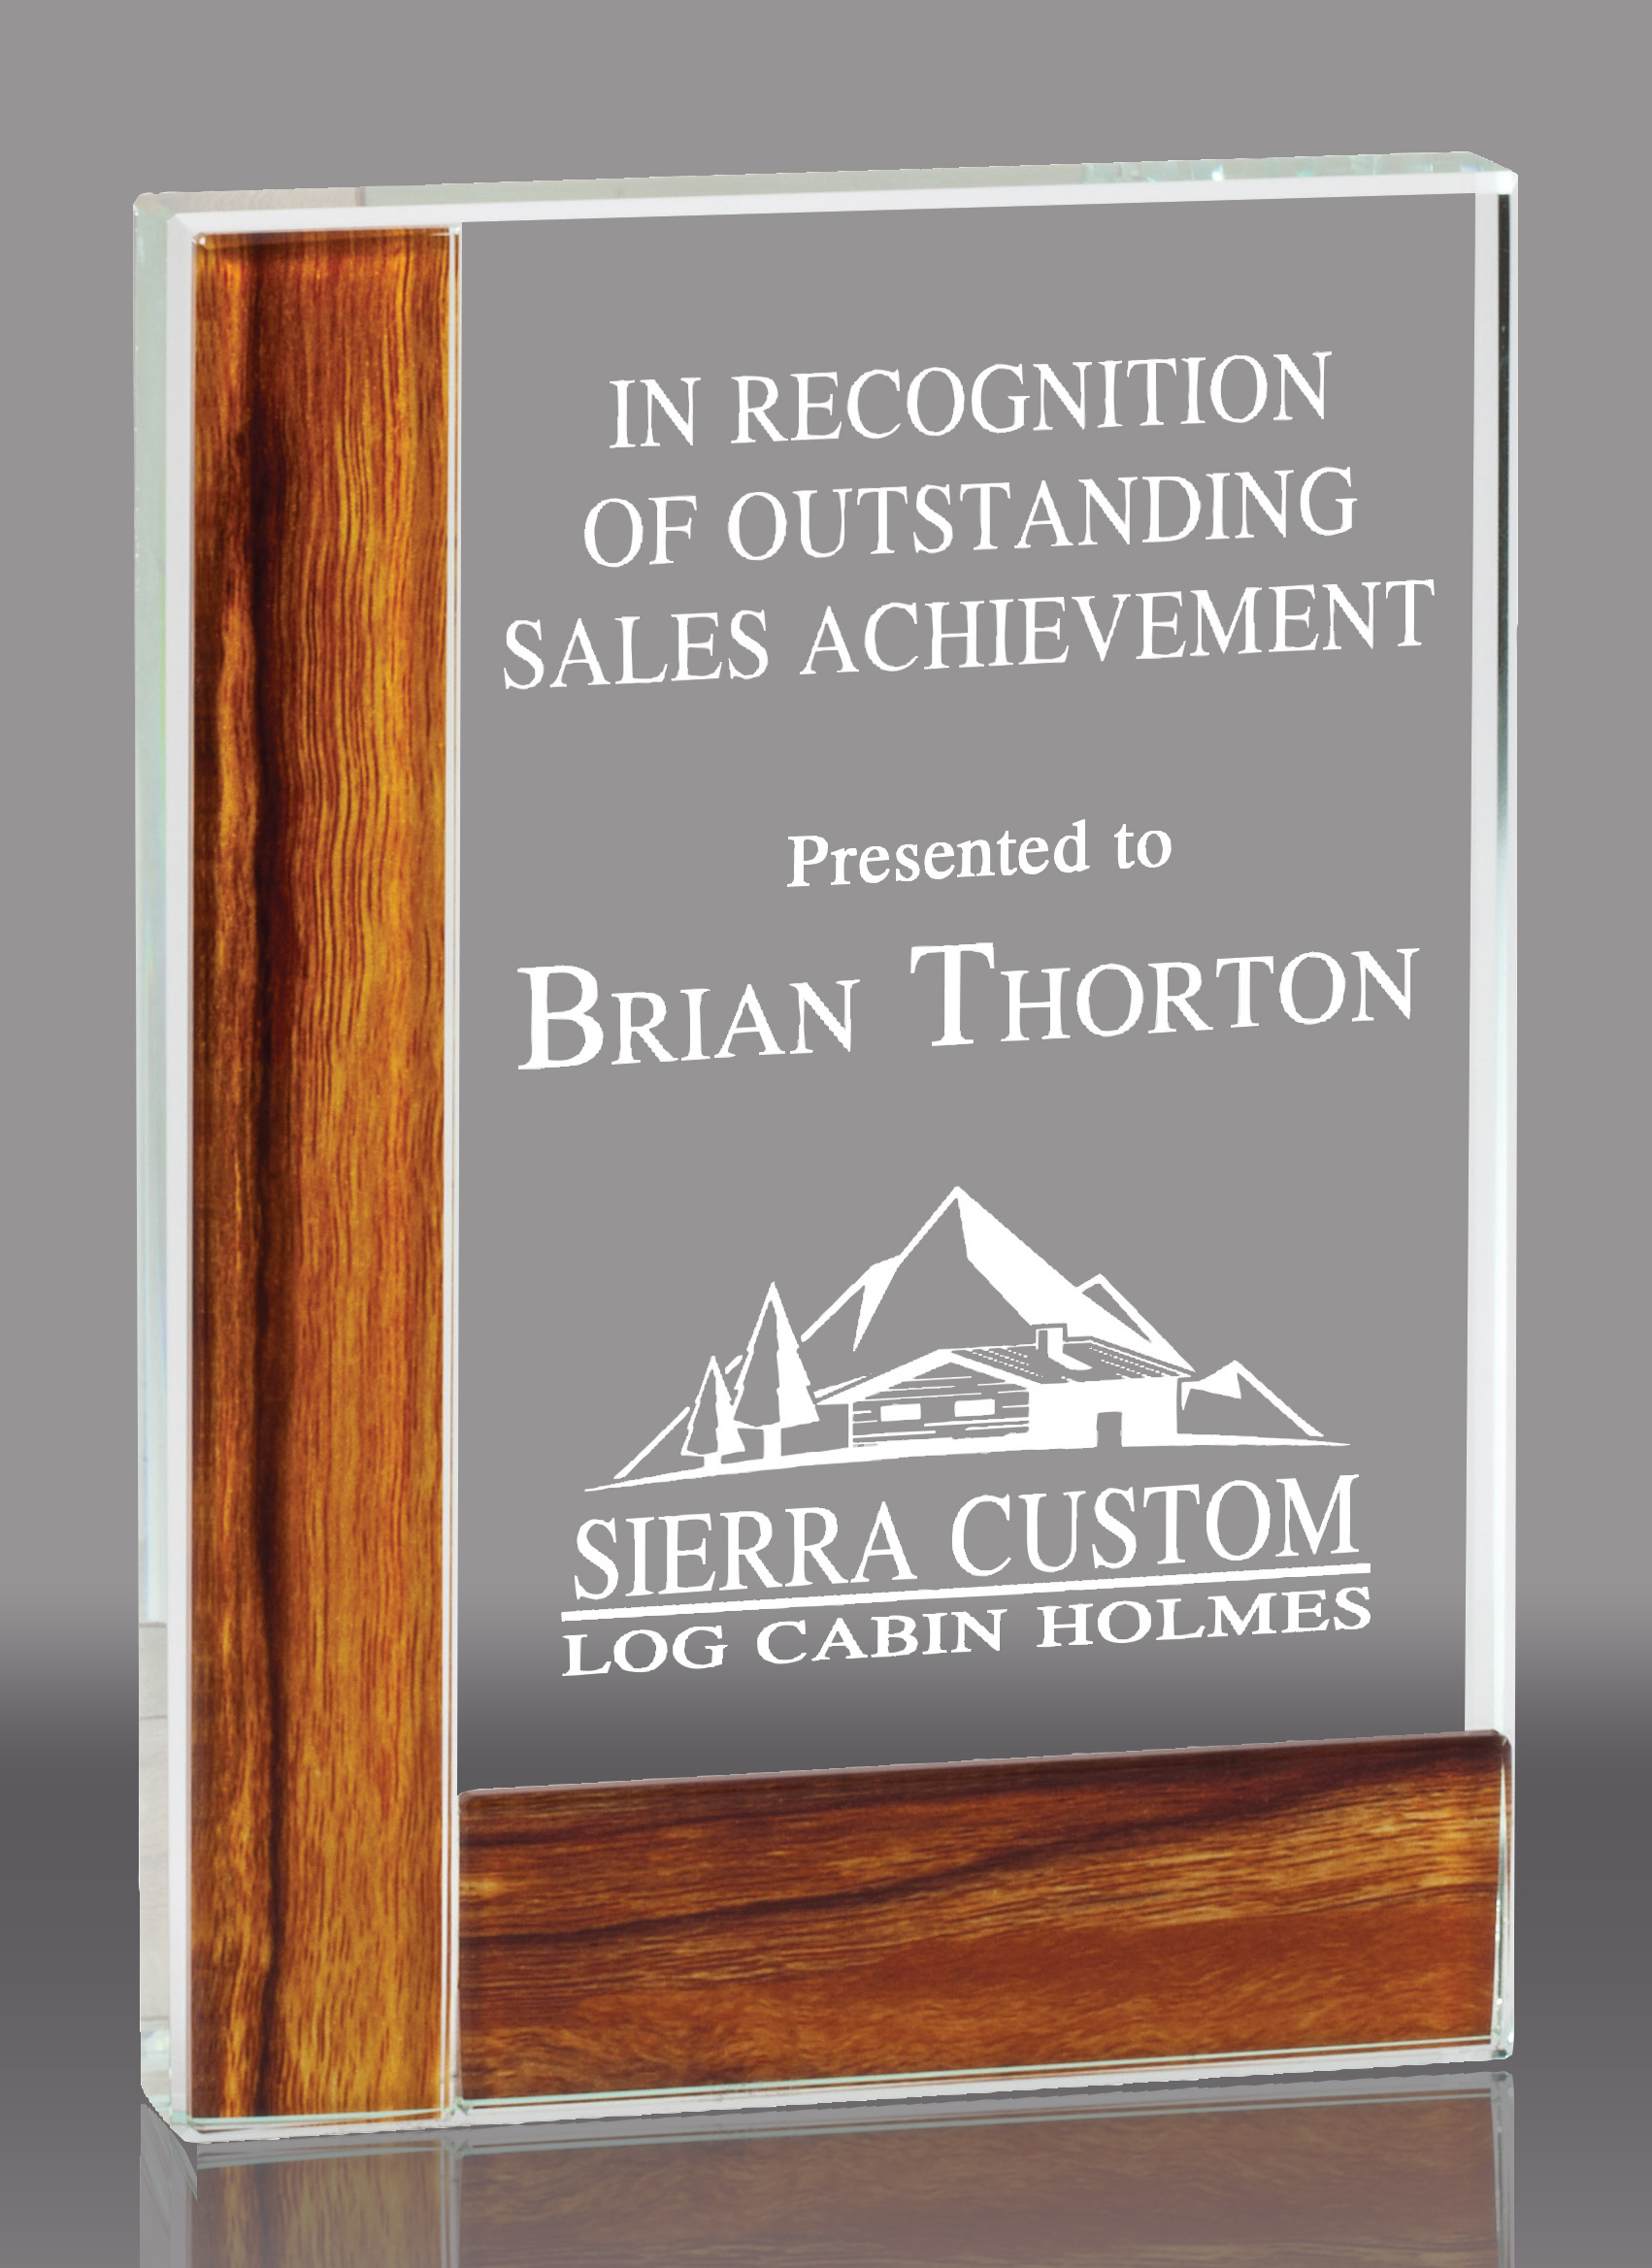 Rectangle Crystal Award with Wood Border - 7 inch